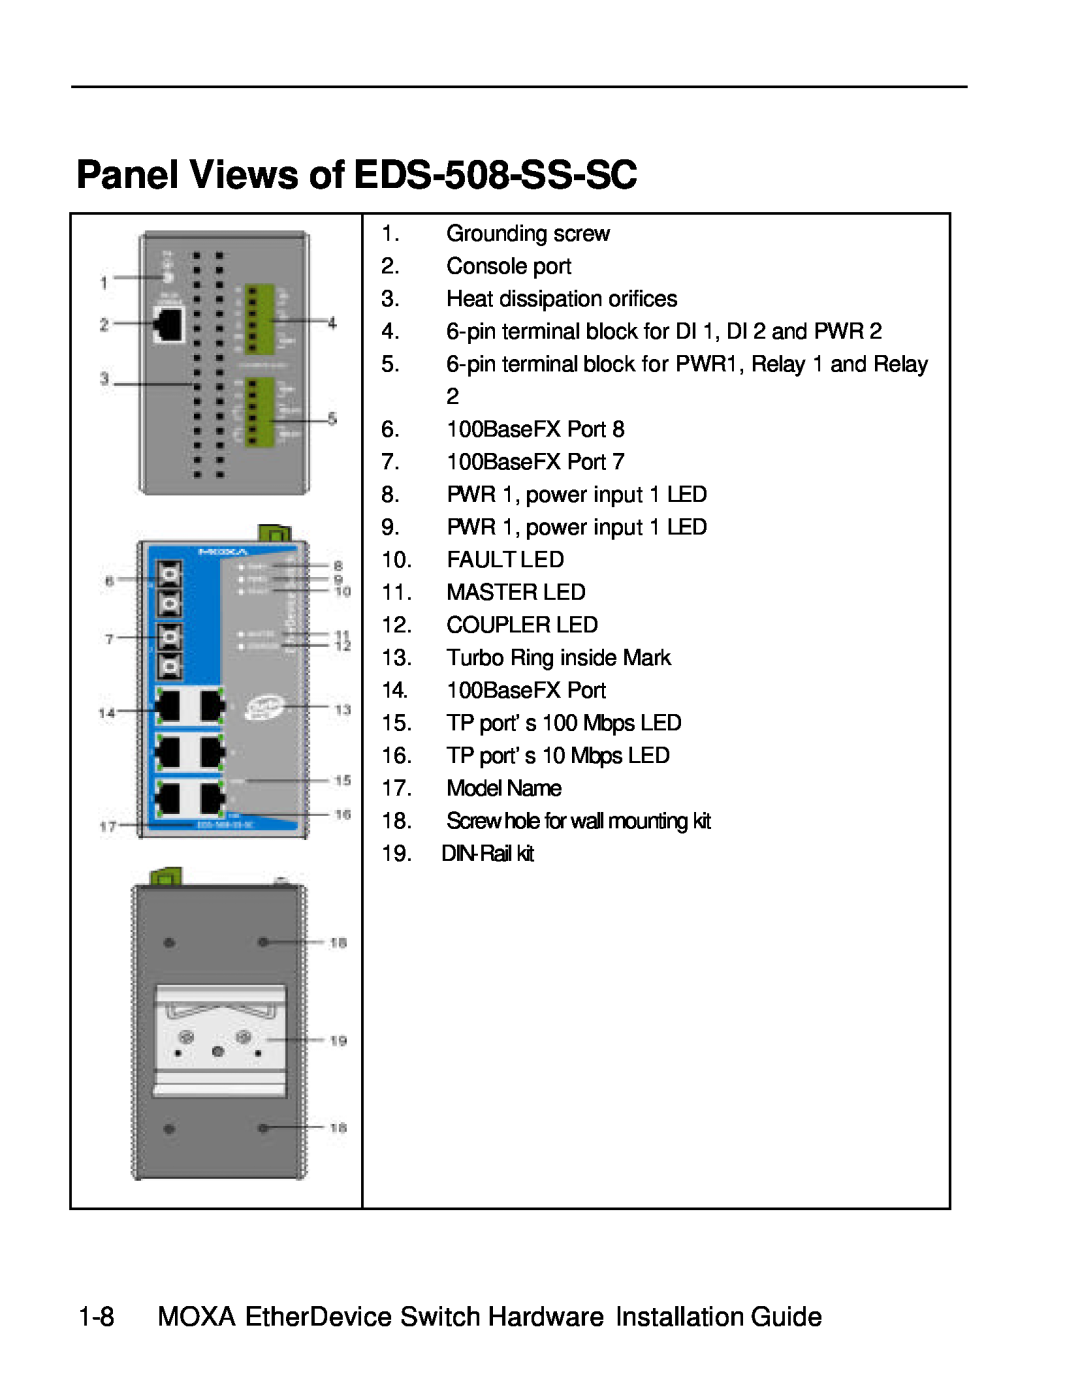 Moxa Technologies manual Panel Views of EDS-508-SS-SC, MOXA EtherDevice Switch Hardware Installation Guide 